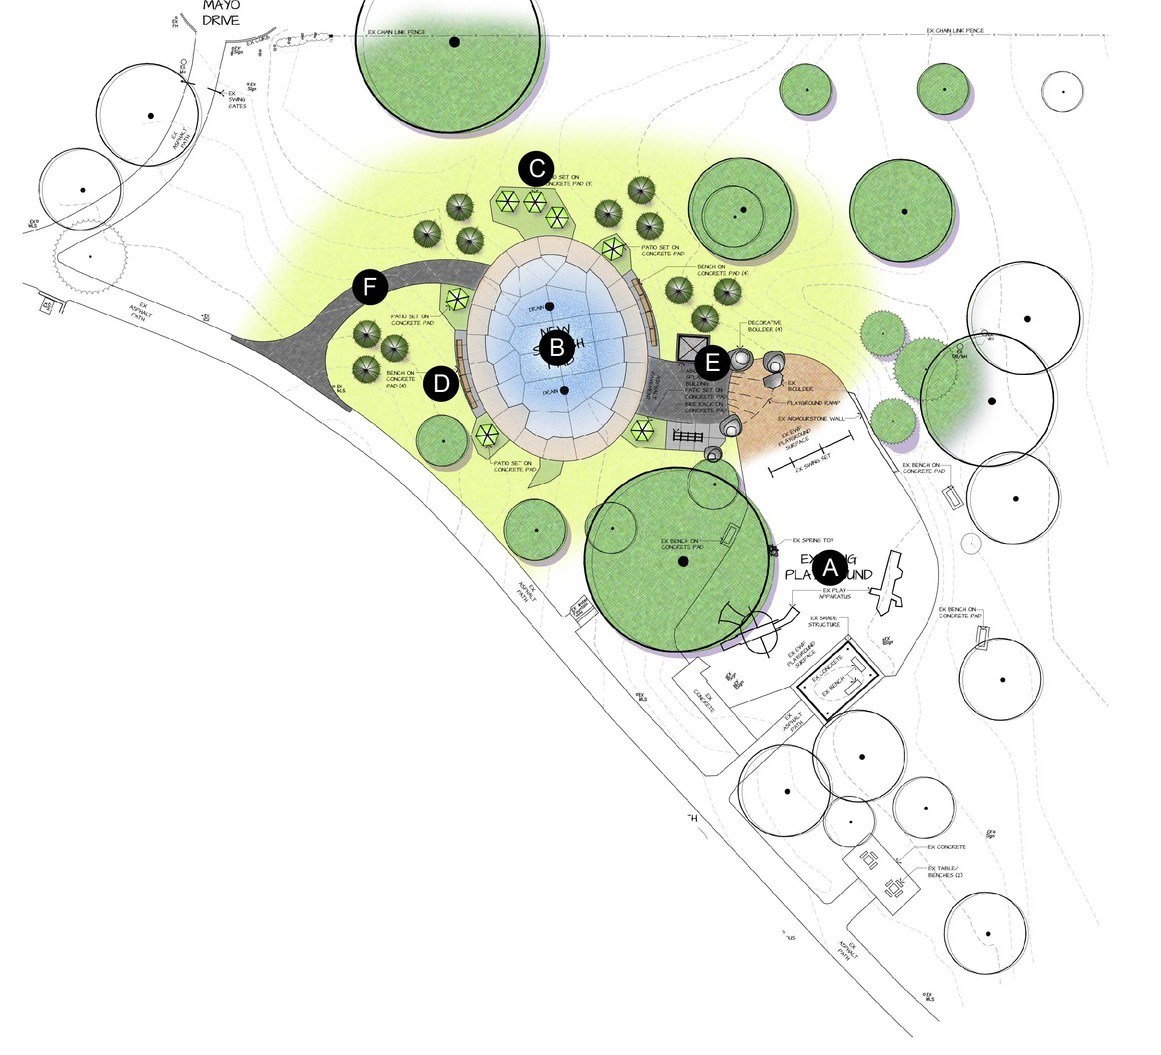 A layout plan for Splash Pad Design A, with numbered labels indicating the location of various features. From the left to right, it includes a new path, new benches, fixed umbrella with seating (beside splash pad), the splash pad (at the centre, circular in shape), new path connecting the splash pad and playground and the playground, which is located just right of the splash pad.